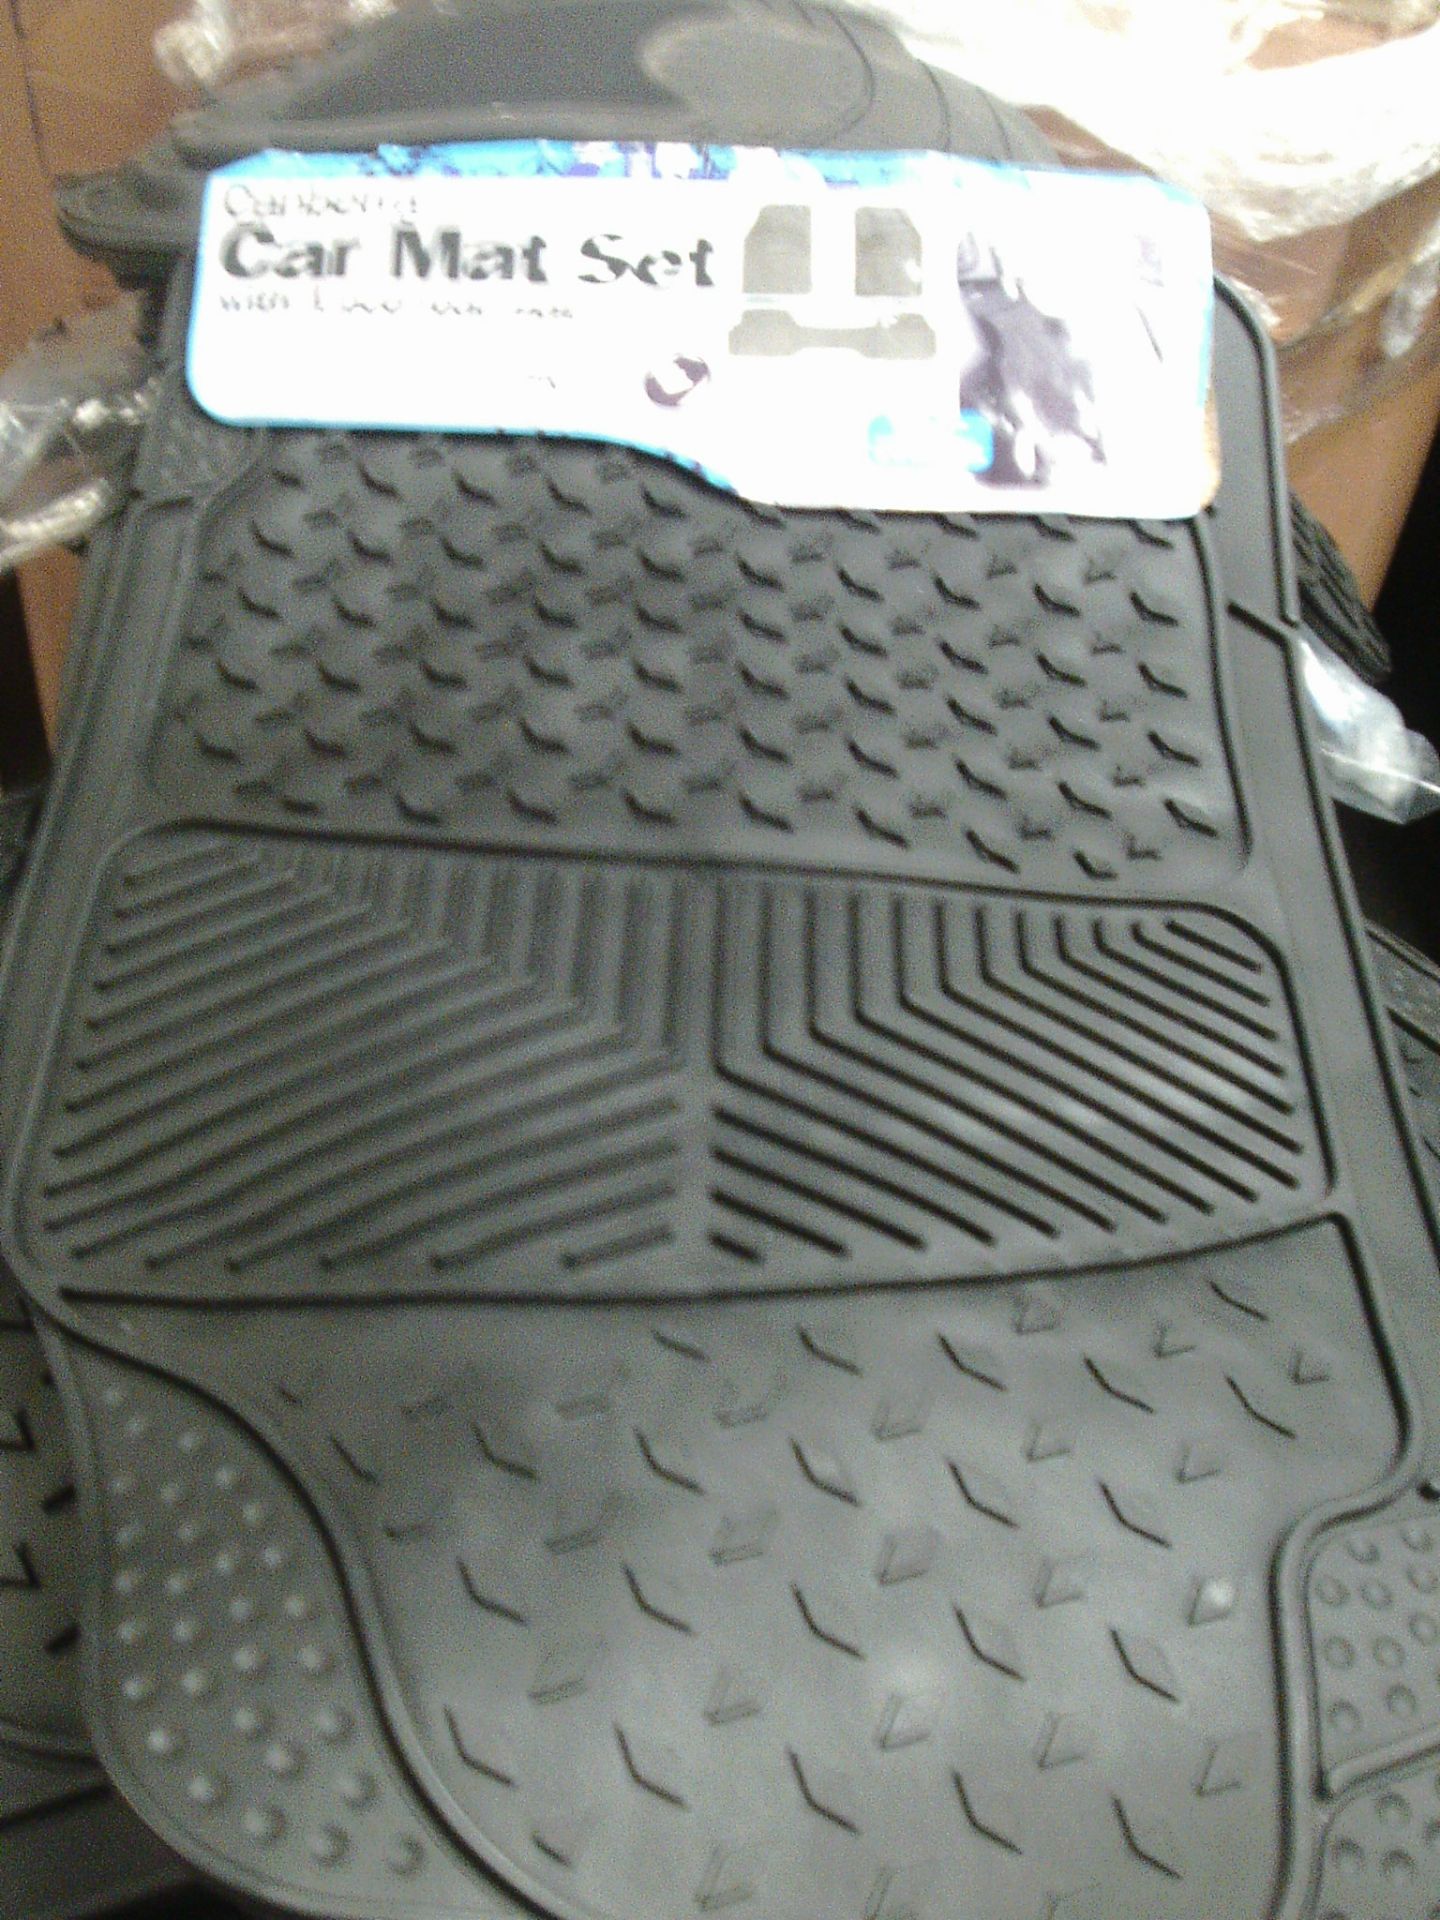 10 x sets of rubber mostly Heavy Duty car mat sets - all new - all complete ranging from £10 - £19.